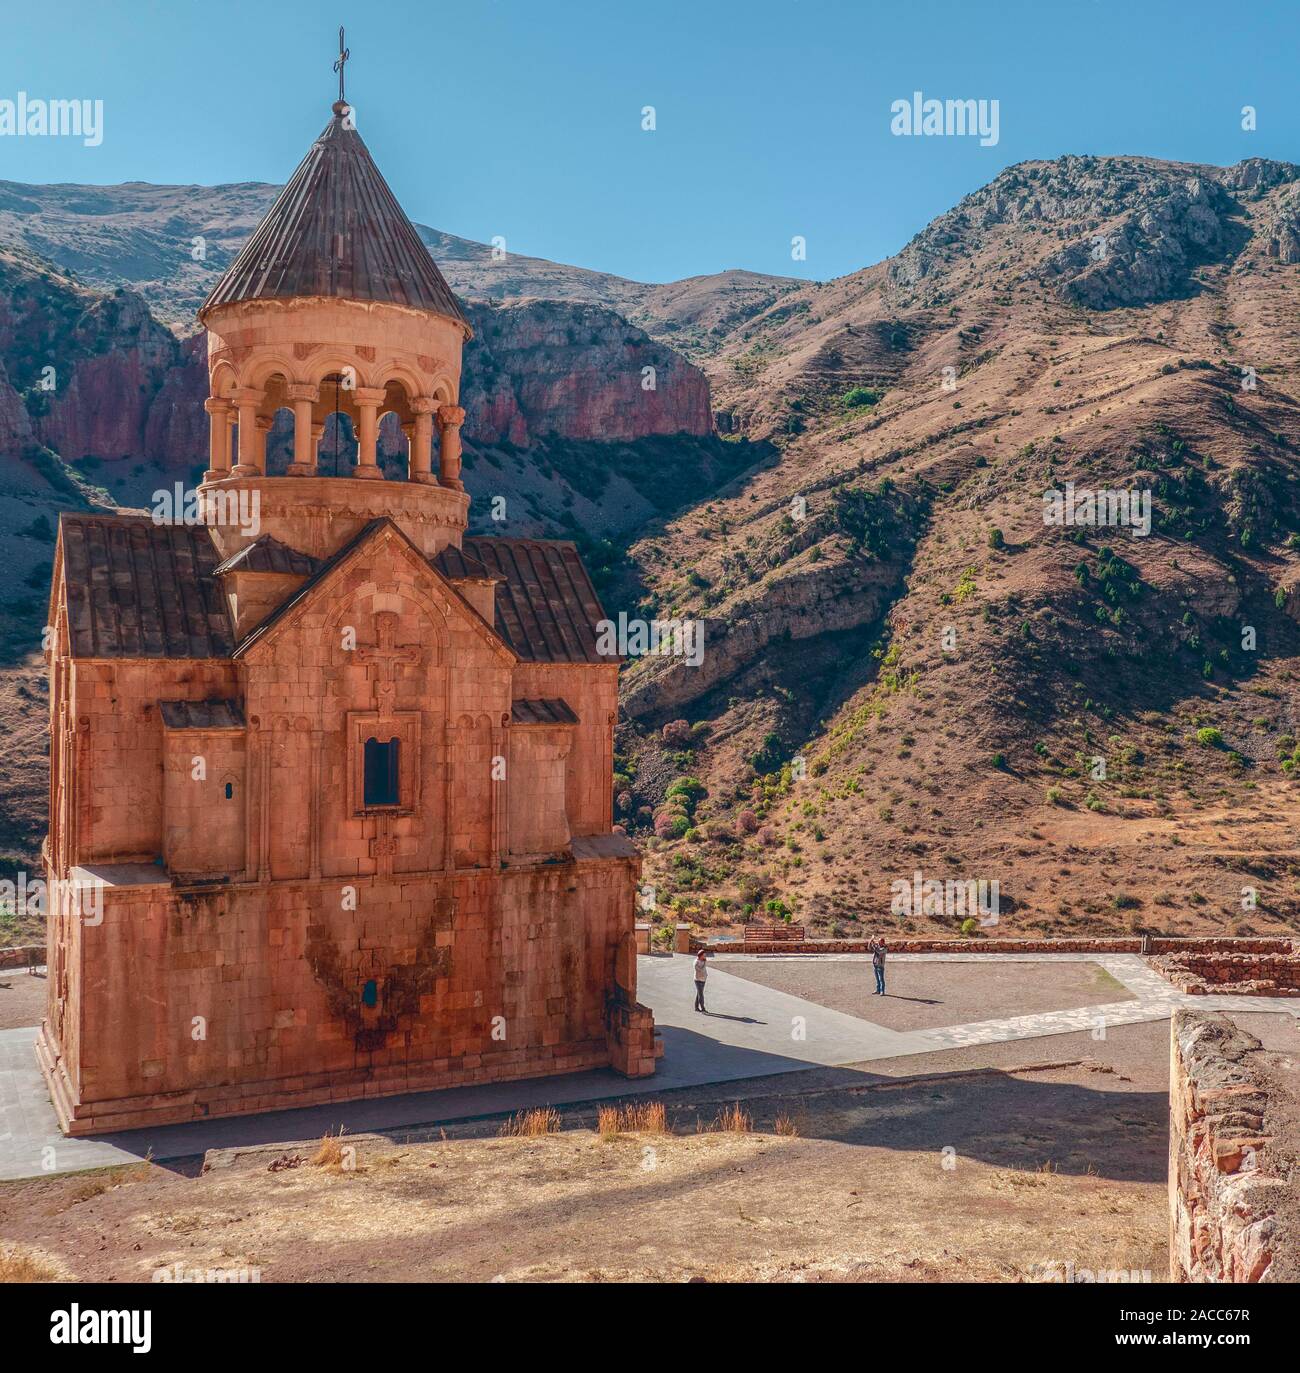 ARMENIA: Noravank 13th C. Monastery Complex. Many Armenian monasteries are set in remote and wild locations. Built in a steep red sandstone gorge, Stock Photo